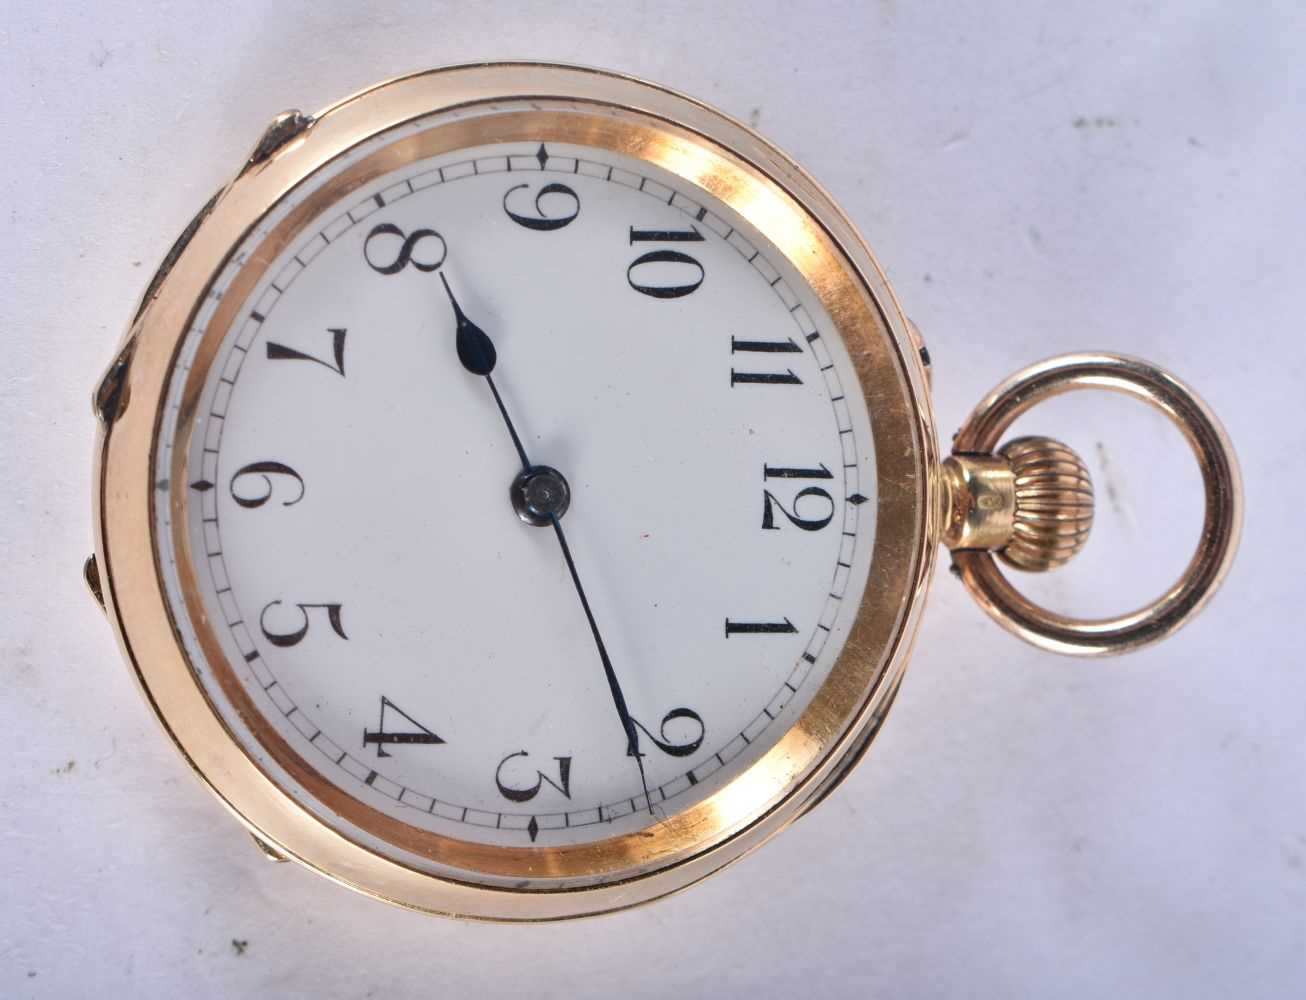 An 18 Carat Gold Cased Open Face Pocket Watch. Stamped 18K, Dial 3.6 cm, weight 39.6g, running